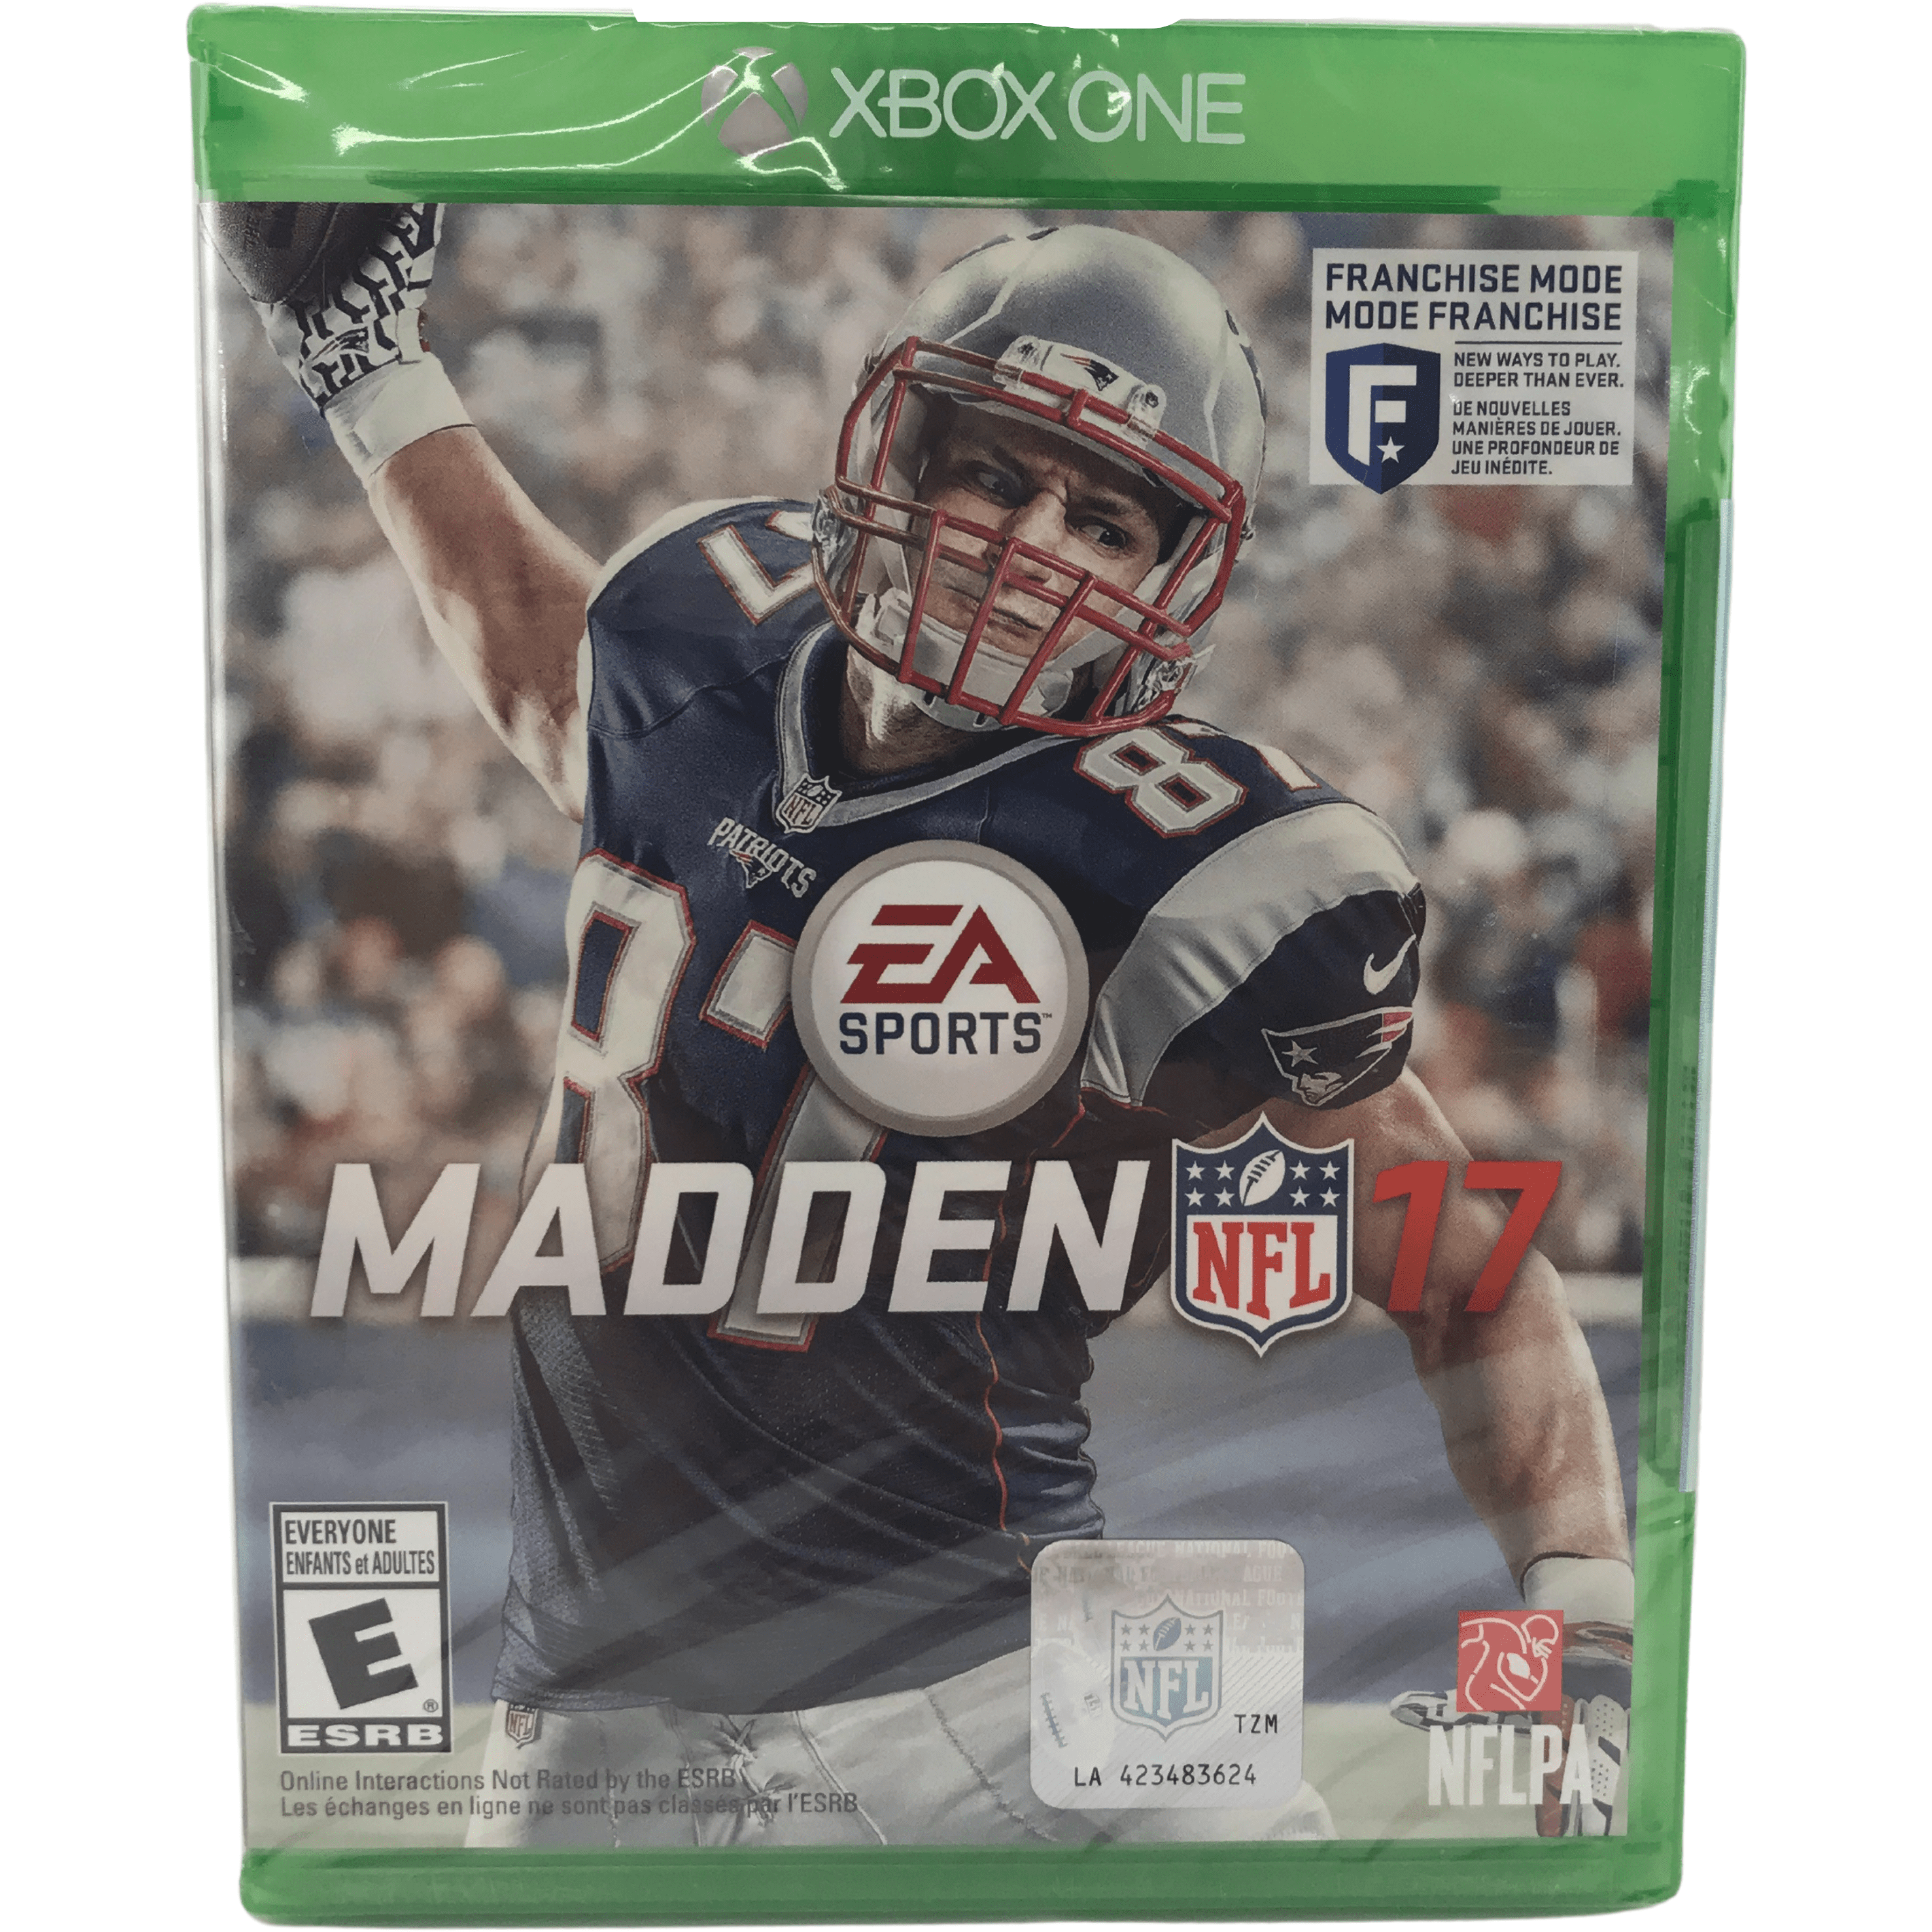 Xbox One "Madden 17" Game: Video Game: New